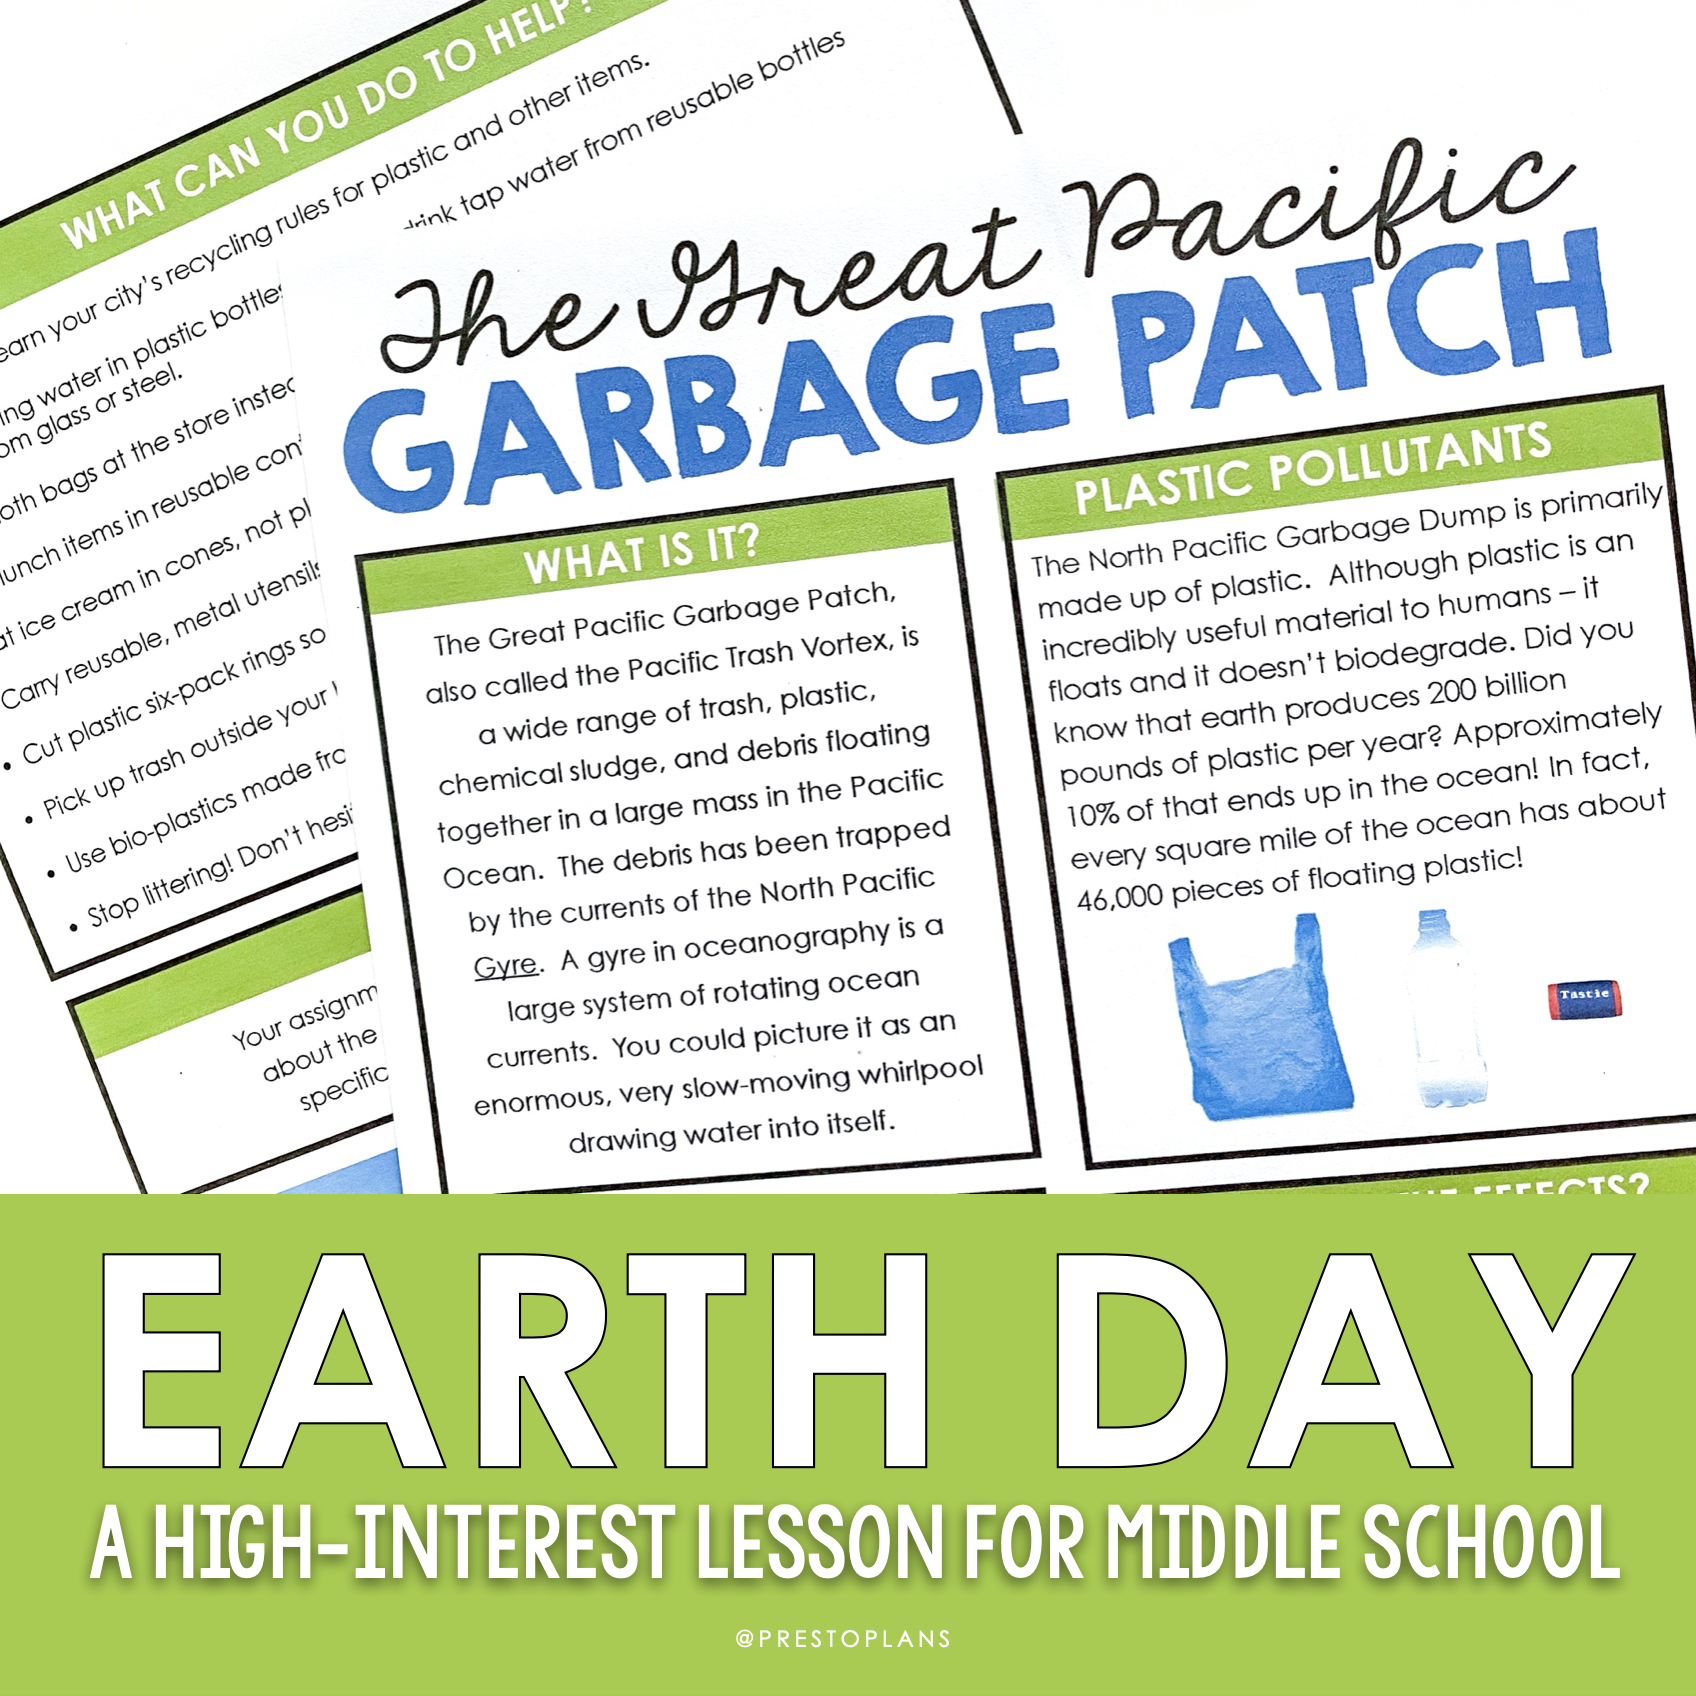 Earth Day lesson for middle school ELA: The Great Pacific Garbage Patch